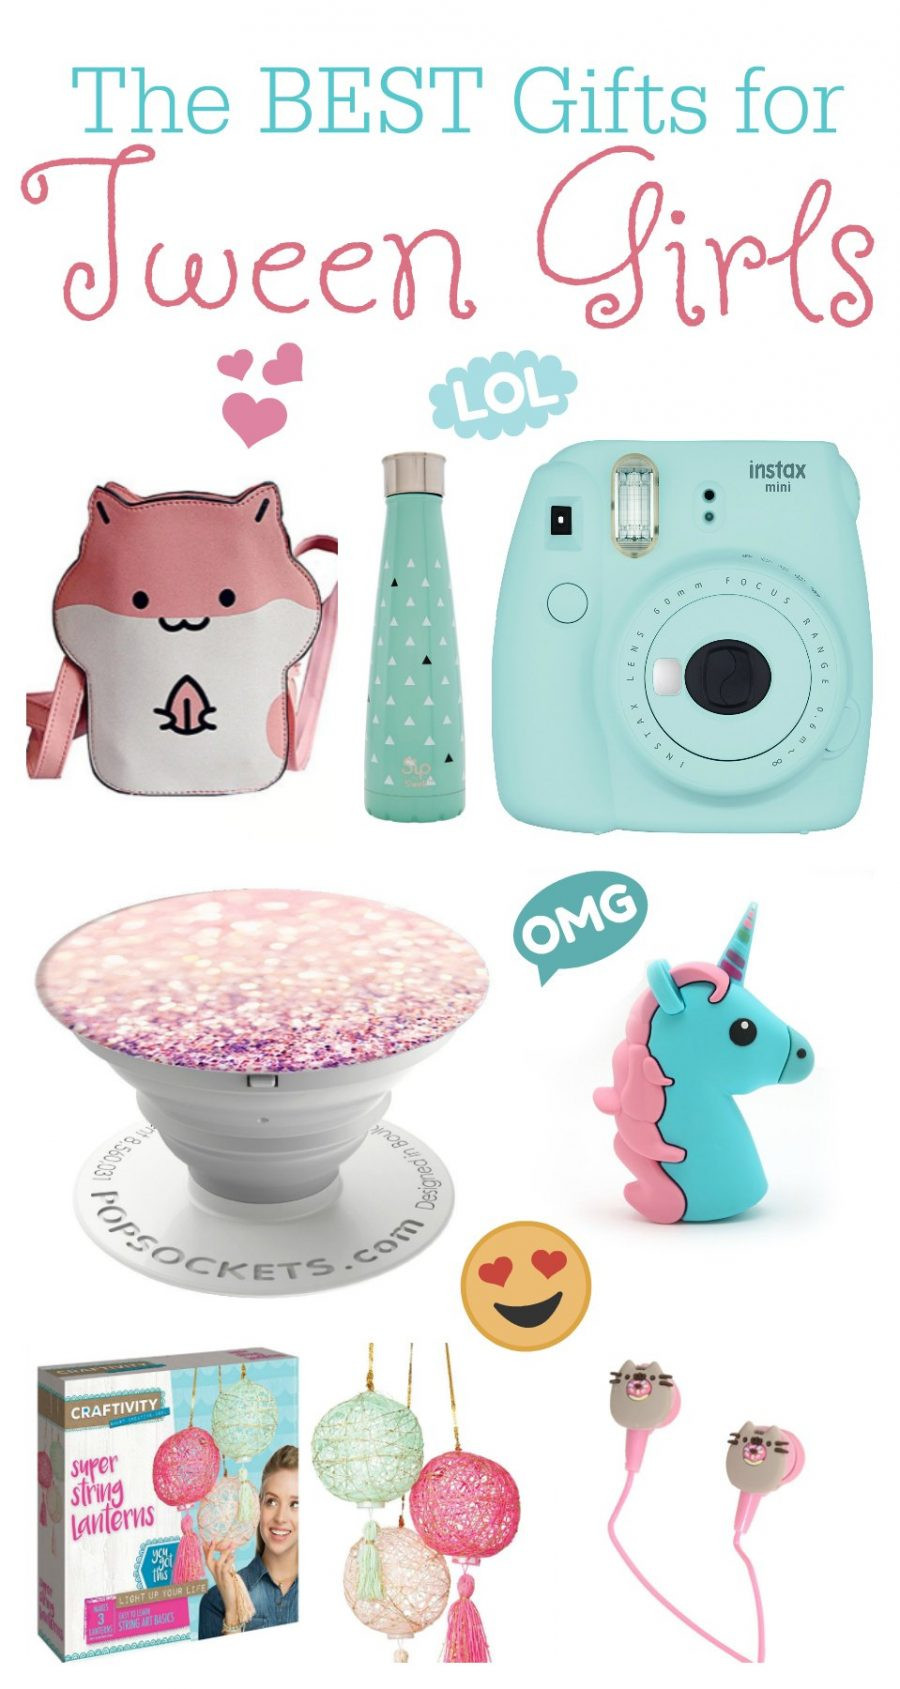 Christmas Gift Ideas For Tweens Girls
 The BEST Gift Ideas for Tween Girls